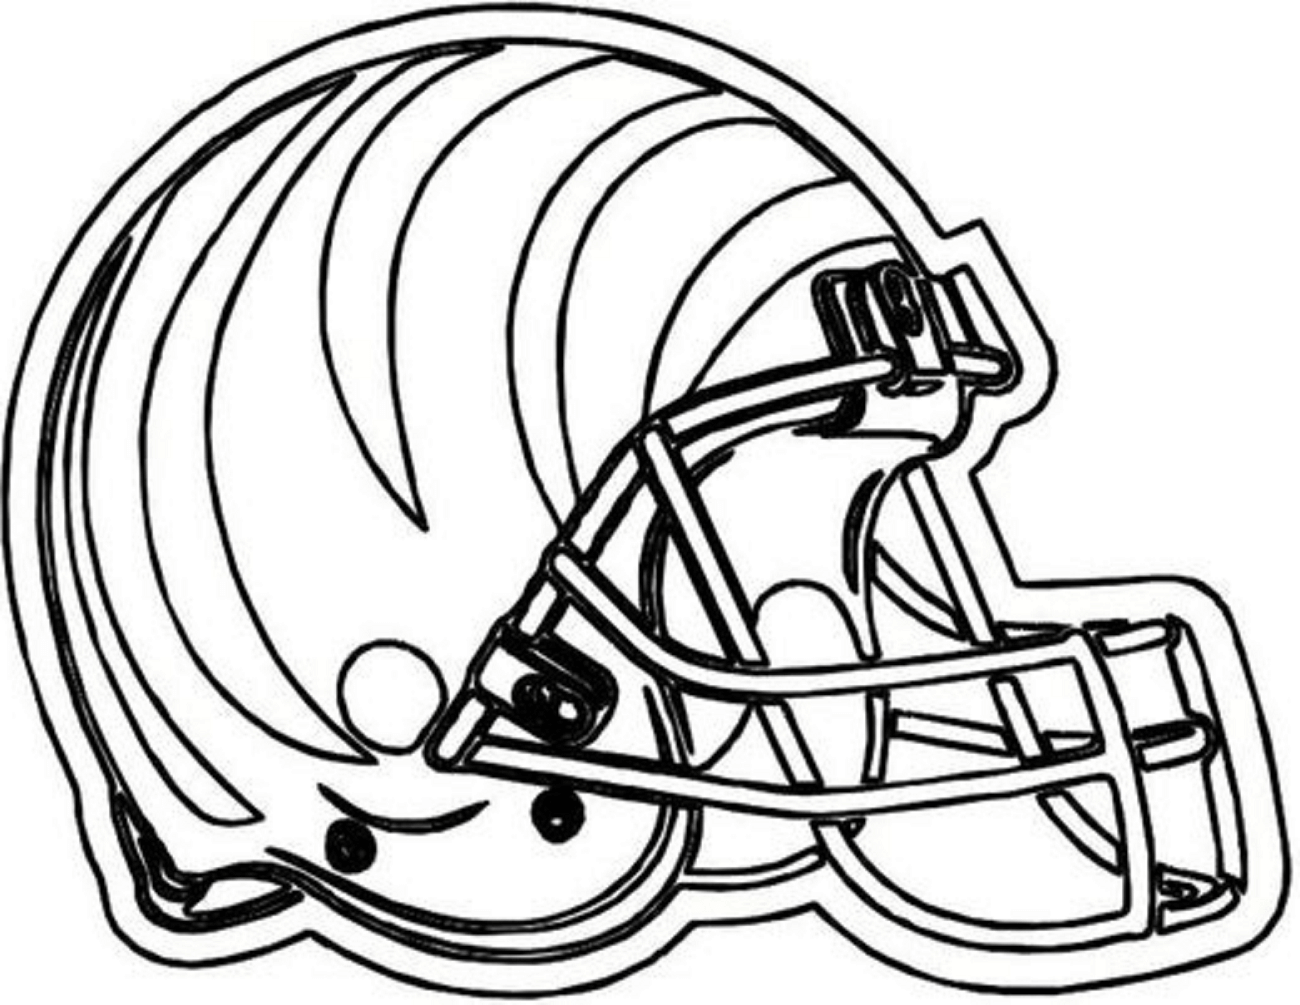 American Football Coloring Pages   Free Printable Coloring Pages ...